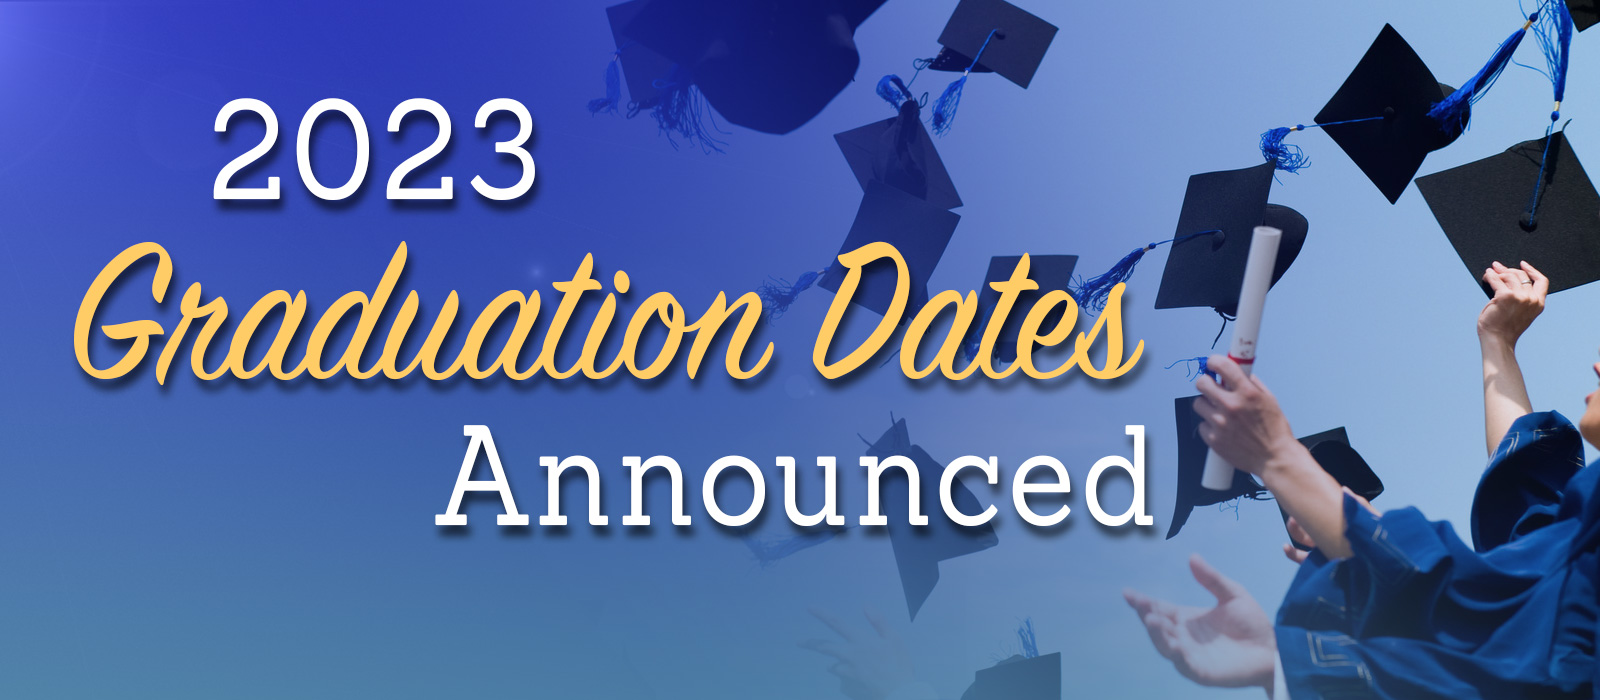 Graduation dates for 2023 announced | Northside Independent School District